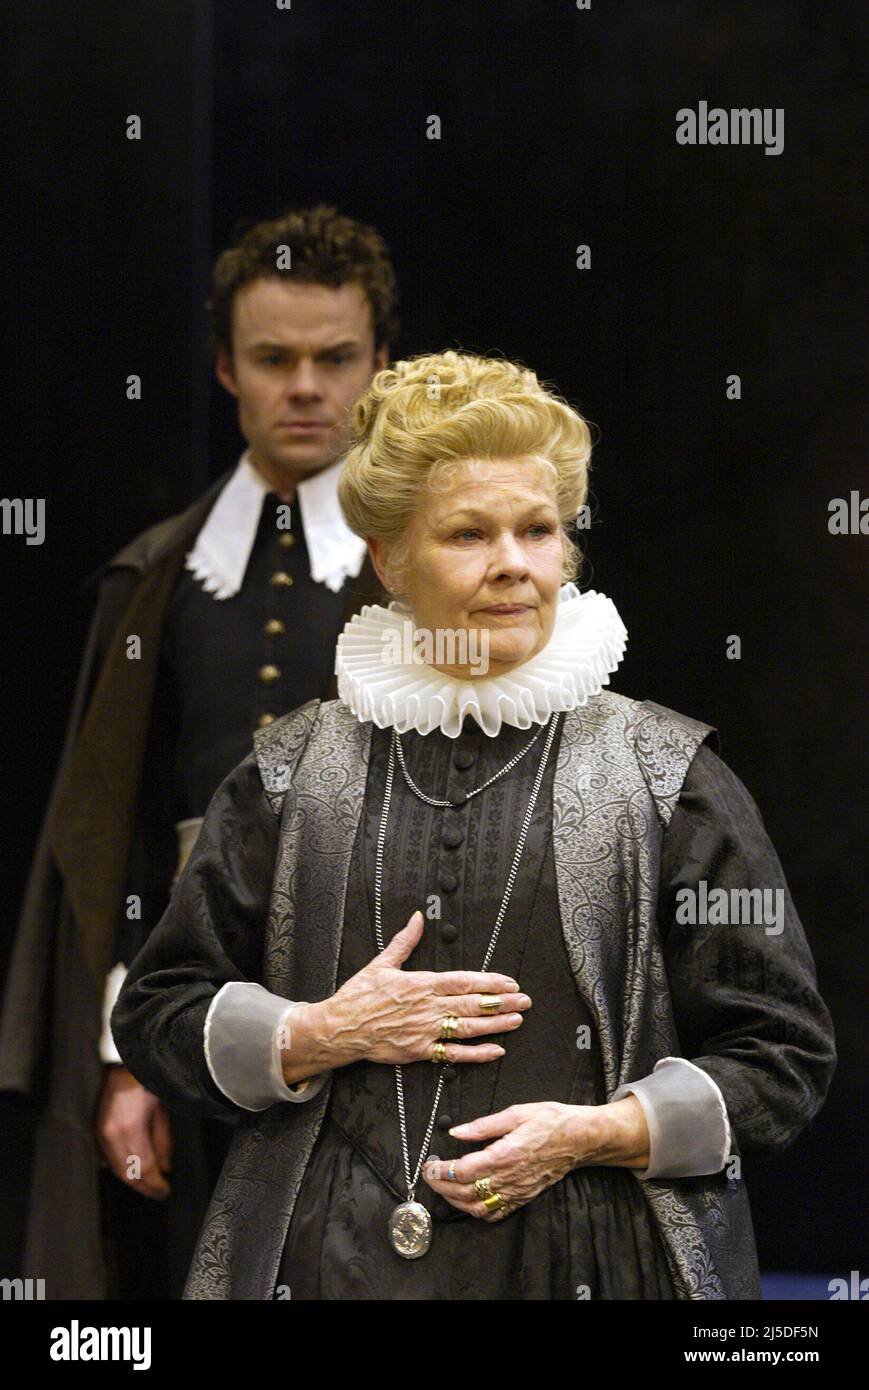 Jamie Glover (Bertram), Judi Dench (The Countess of Rossillion) in ALL'S WELL THAT ENDS WELL by Shakespeare at the Swan Theatre, Royal Shakespeare Company (RSC), Stratford-upon-Avon, England  11/12/2003  set design: Stephen Brimson Lewis  costumes: Deirdre Clancy  lighting: Paul Pyant  movement: Michael Ashcroft  director: Gregory Doran Stock Photo